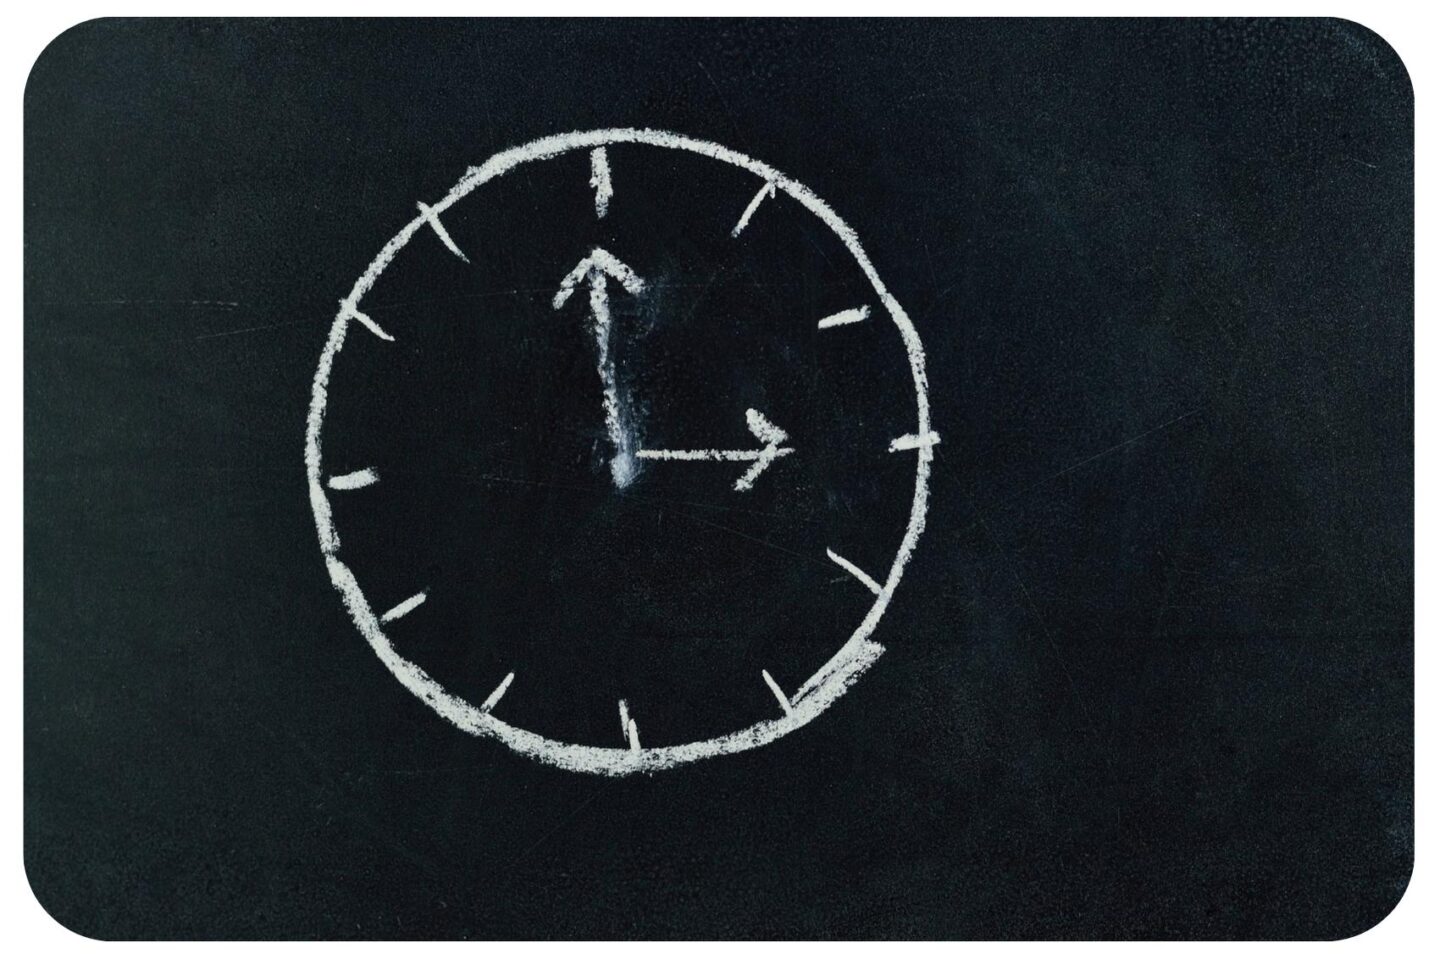 The image features a black chalkboard background. A white chalk analog clock is drawn on it. The hour hand points to the 3 and the minute hand points to the 12. There are no numbers on the clock, only dashes.